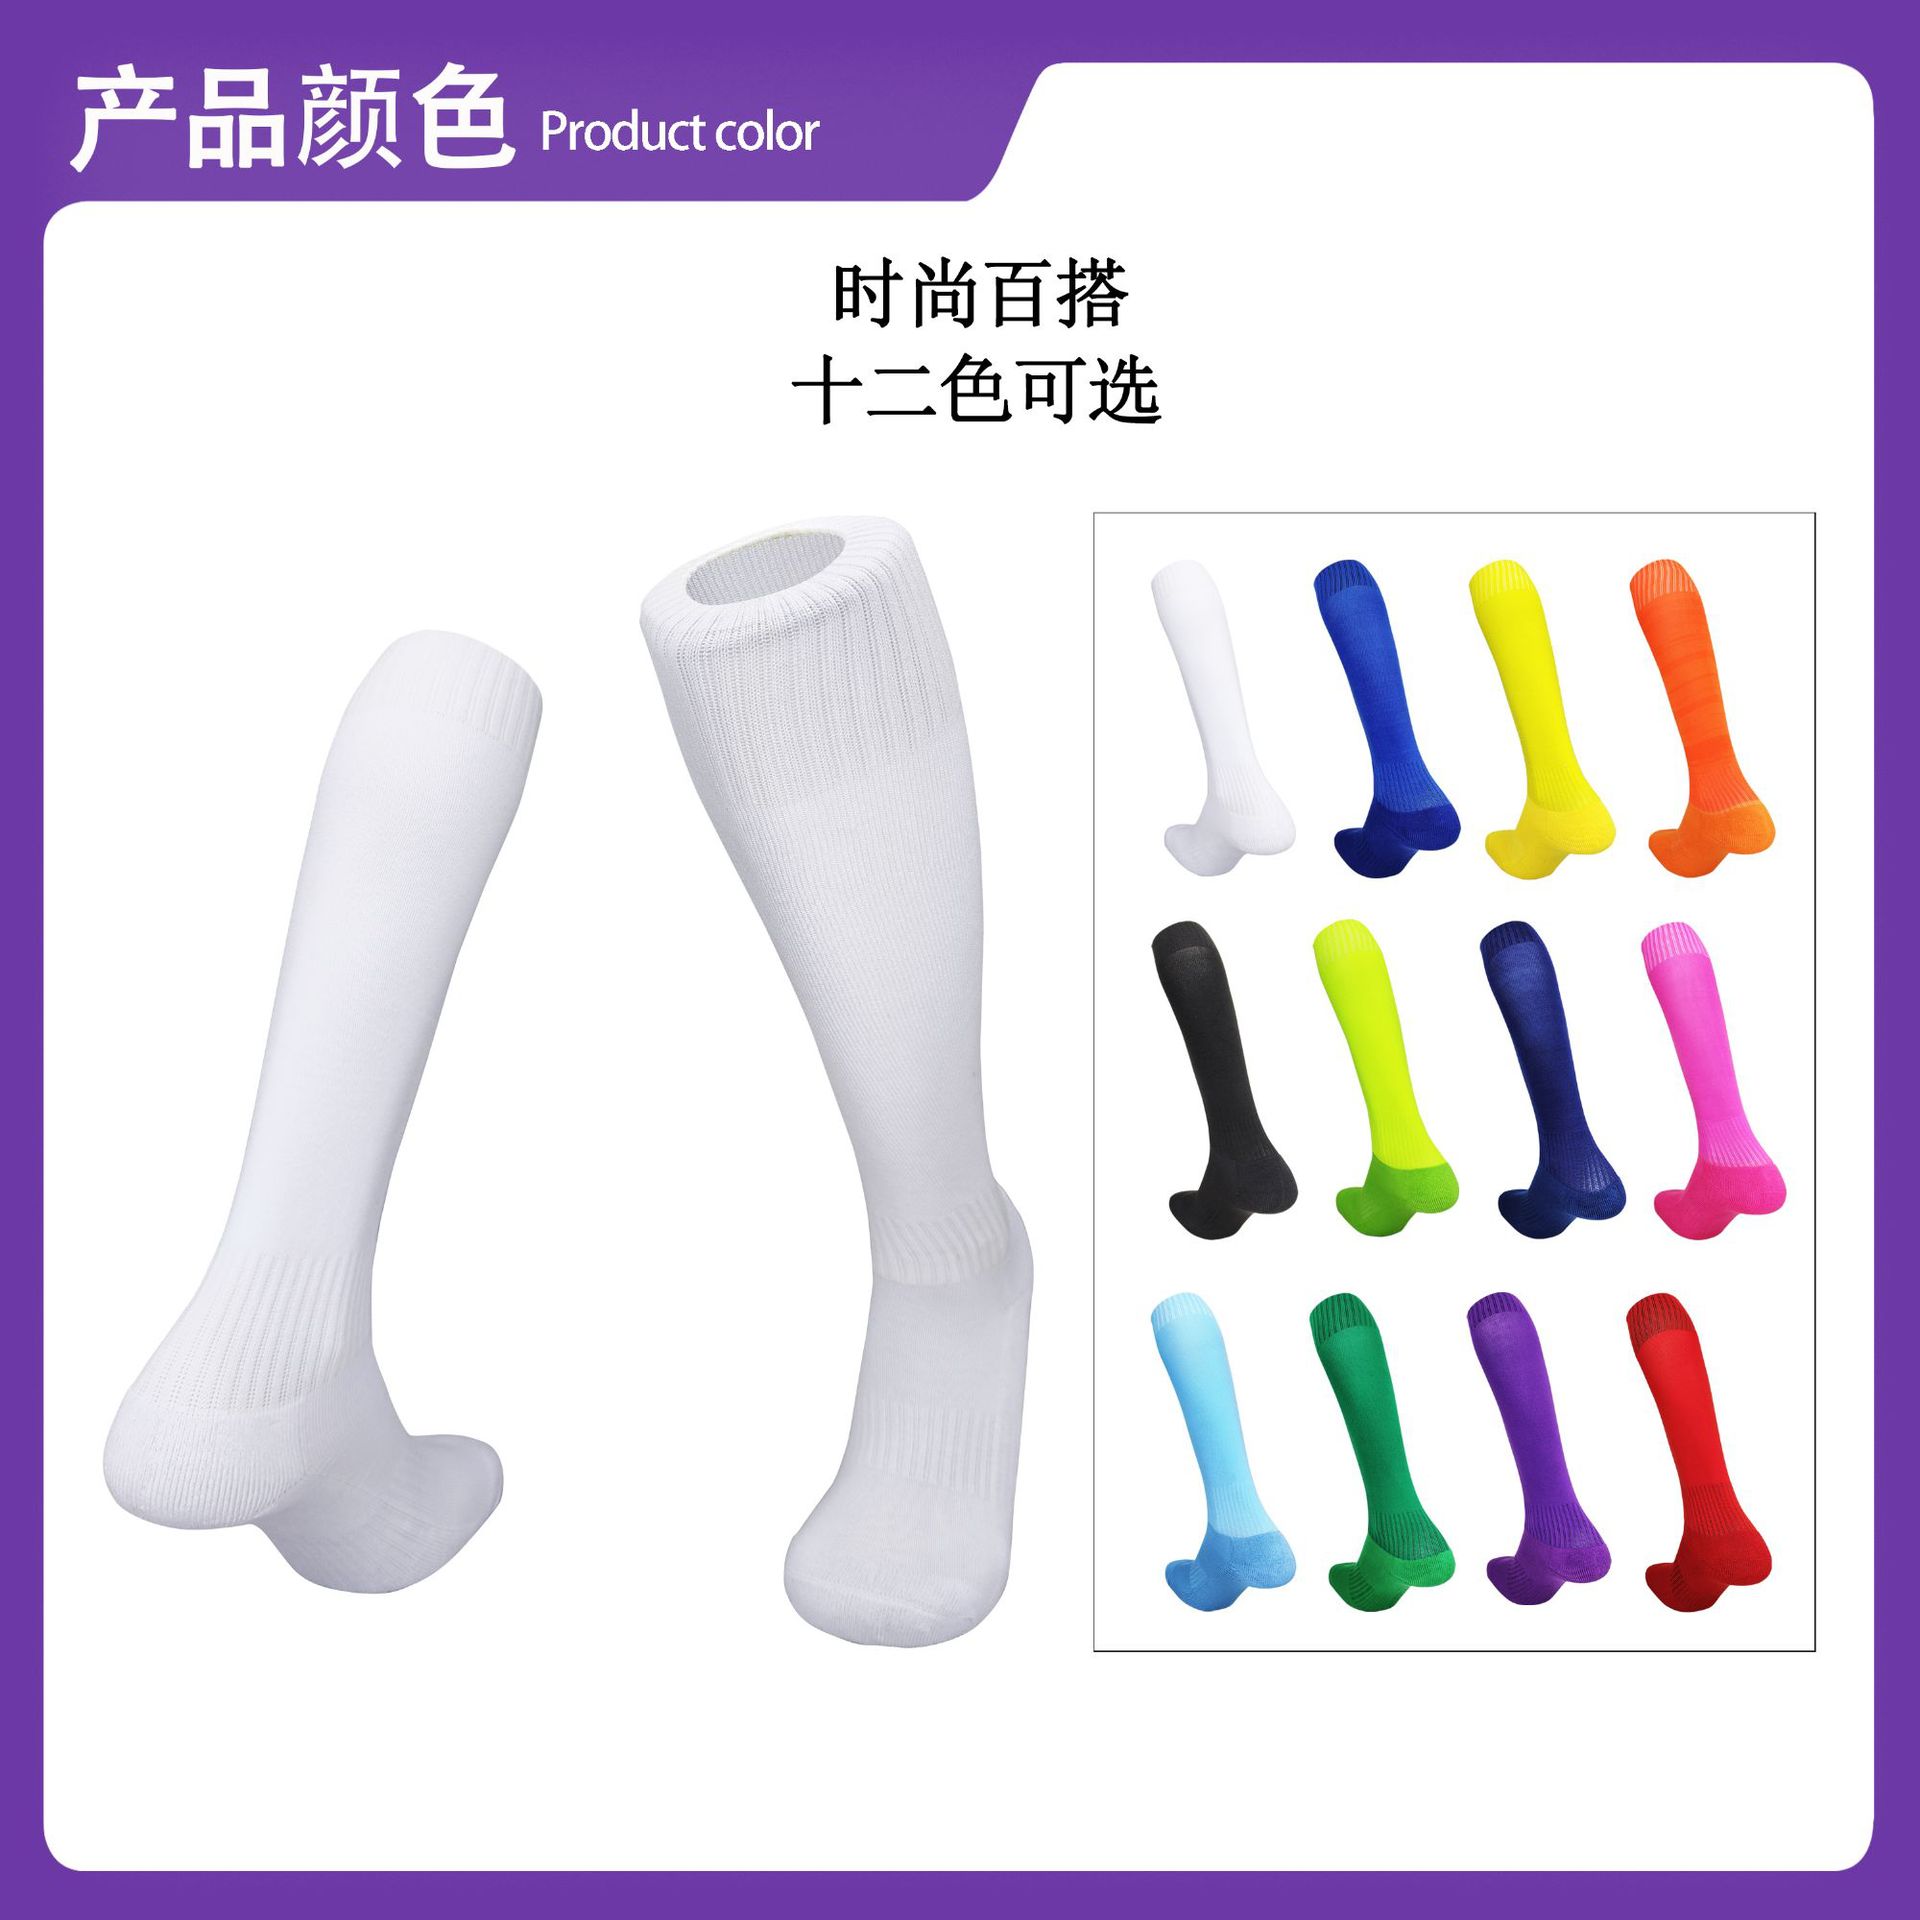 Light Board All-Match over the Knee Stockings Soccer Socks Adult and Children Terry Sole Socks Sweat-Absorbent Breathable Sports Socks Wholesale